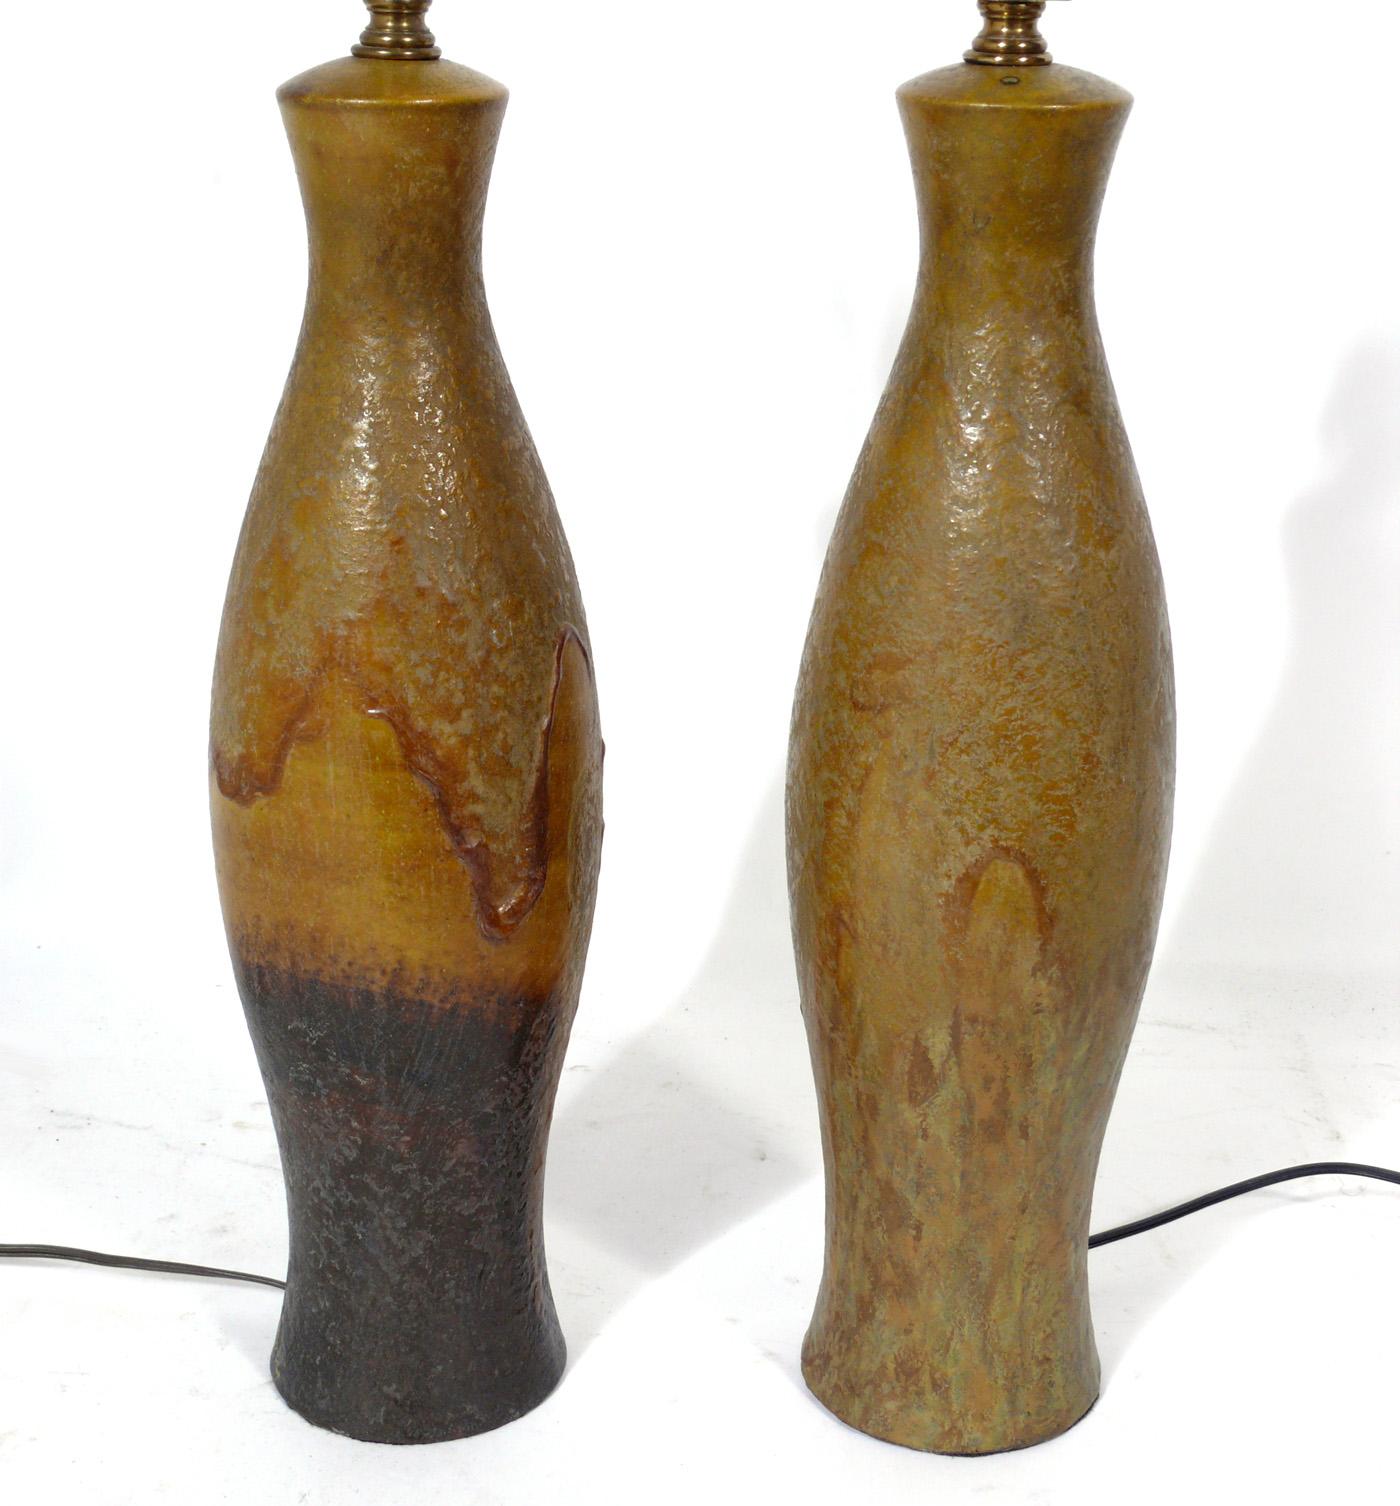 Pair of unique ceramic lamps by Marcello Fantoni, Italy, circa 1950s. Hand signed. Large scale sculptural forms, each uniquely hand painted, then glazed by the artist. The priced noted below includes the shades. They have been rewired and are ready